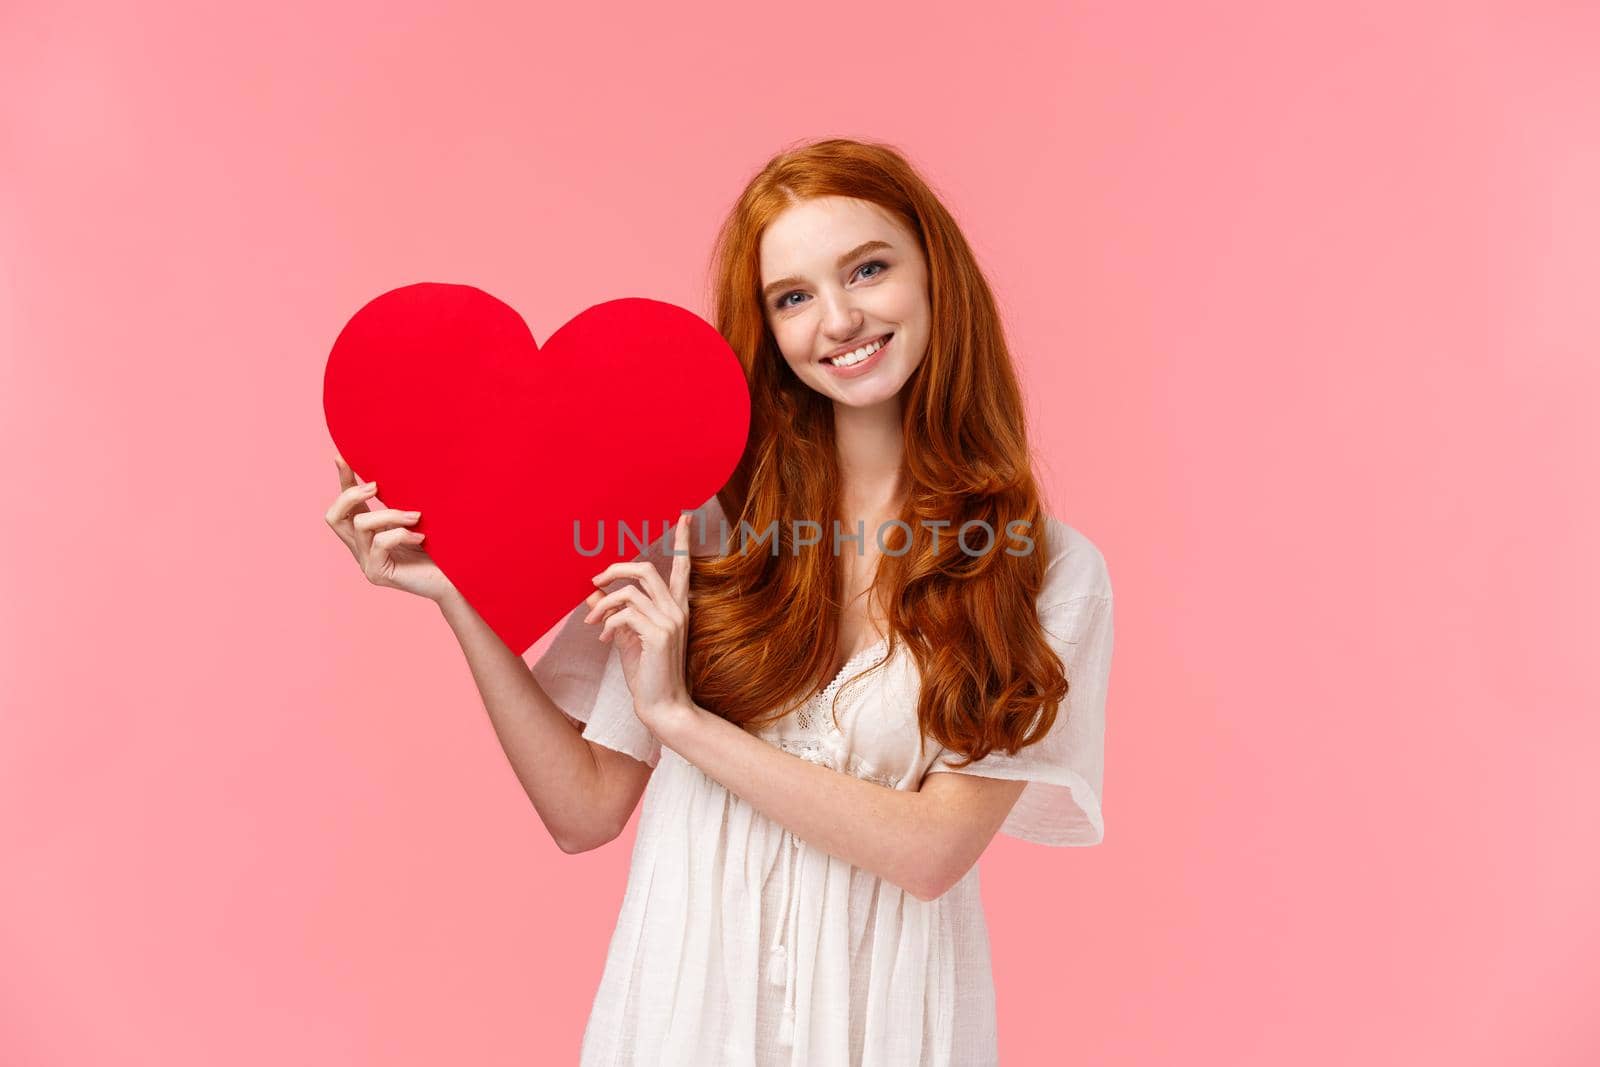 Relationship, care and valentines concept. Tender lovely redhead caucasian female in white dress, holding big red heart and smiling, confessing love, express sympathy or admiration, pink background.